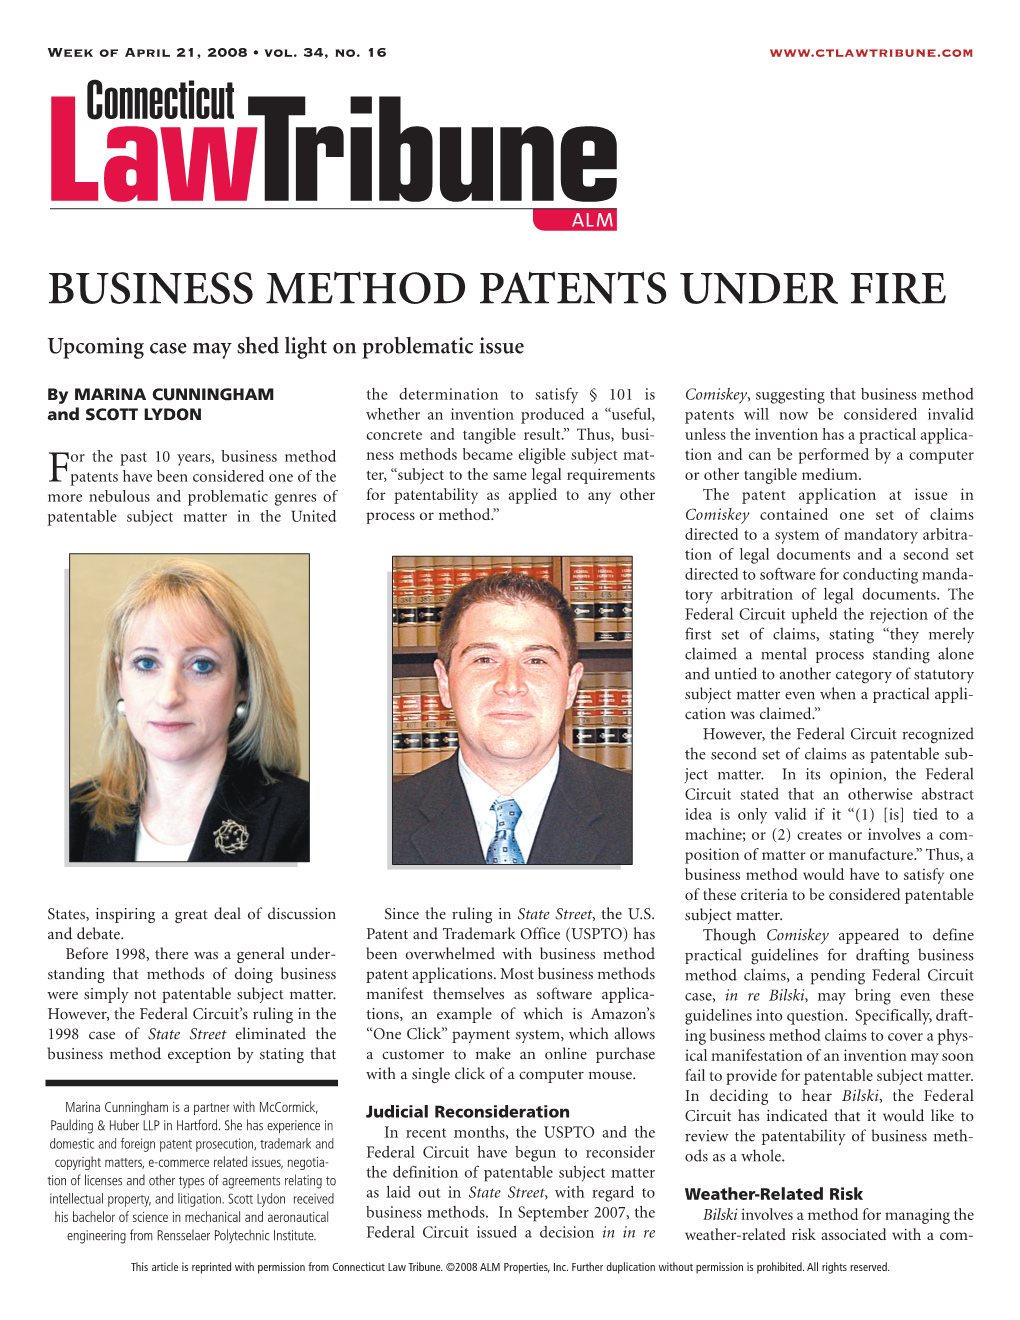 BUSINESS METHOD PATENTS UNDER FIRE Upcoming Case May Shed Light on Problematic Issue